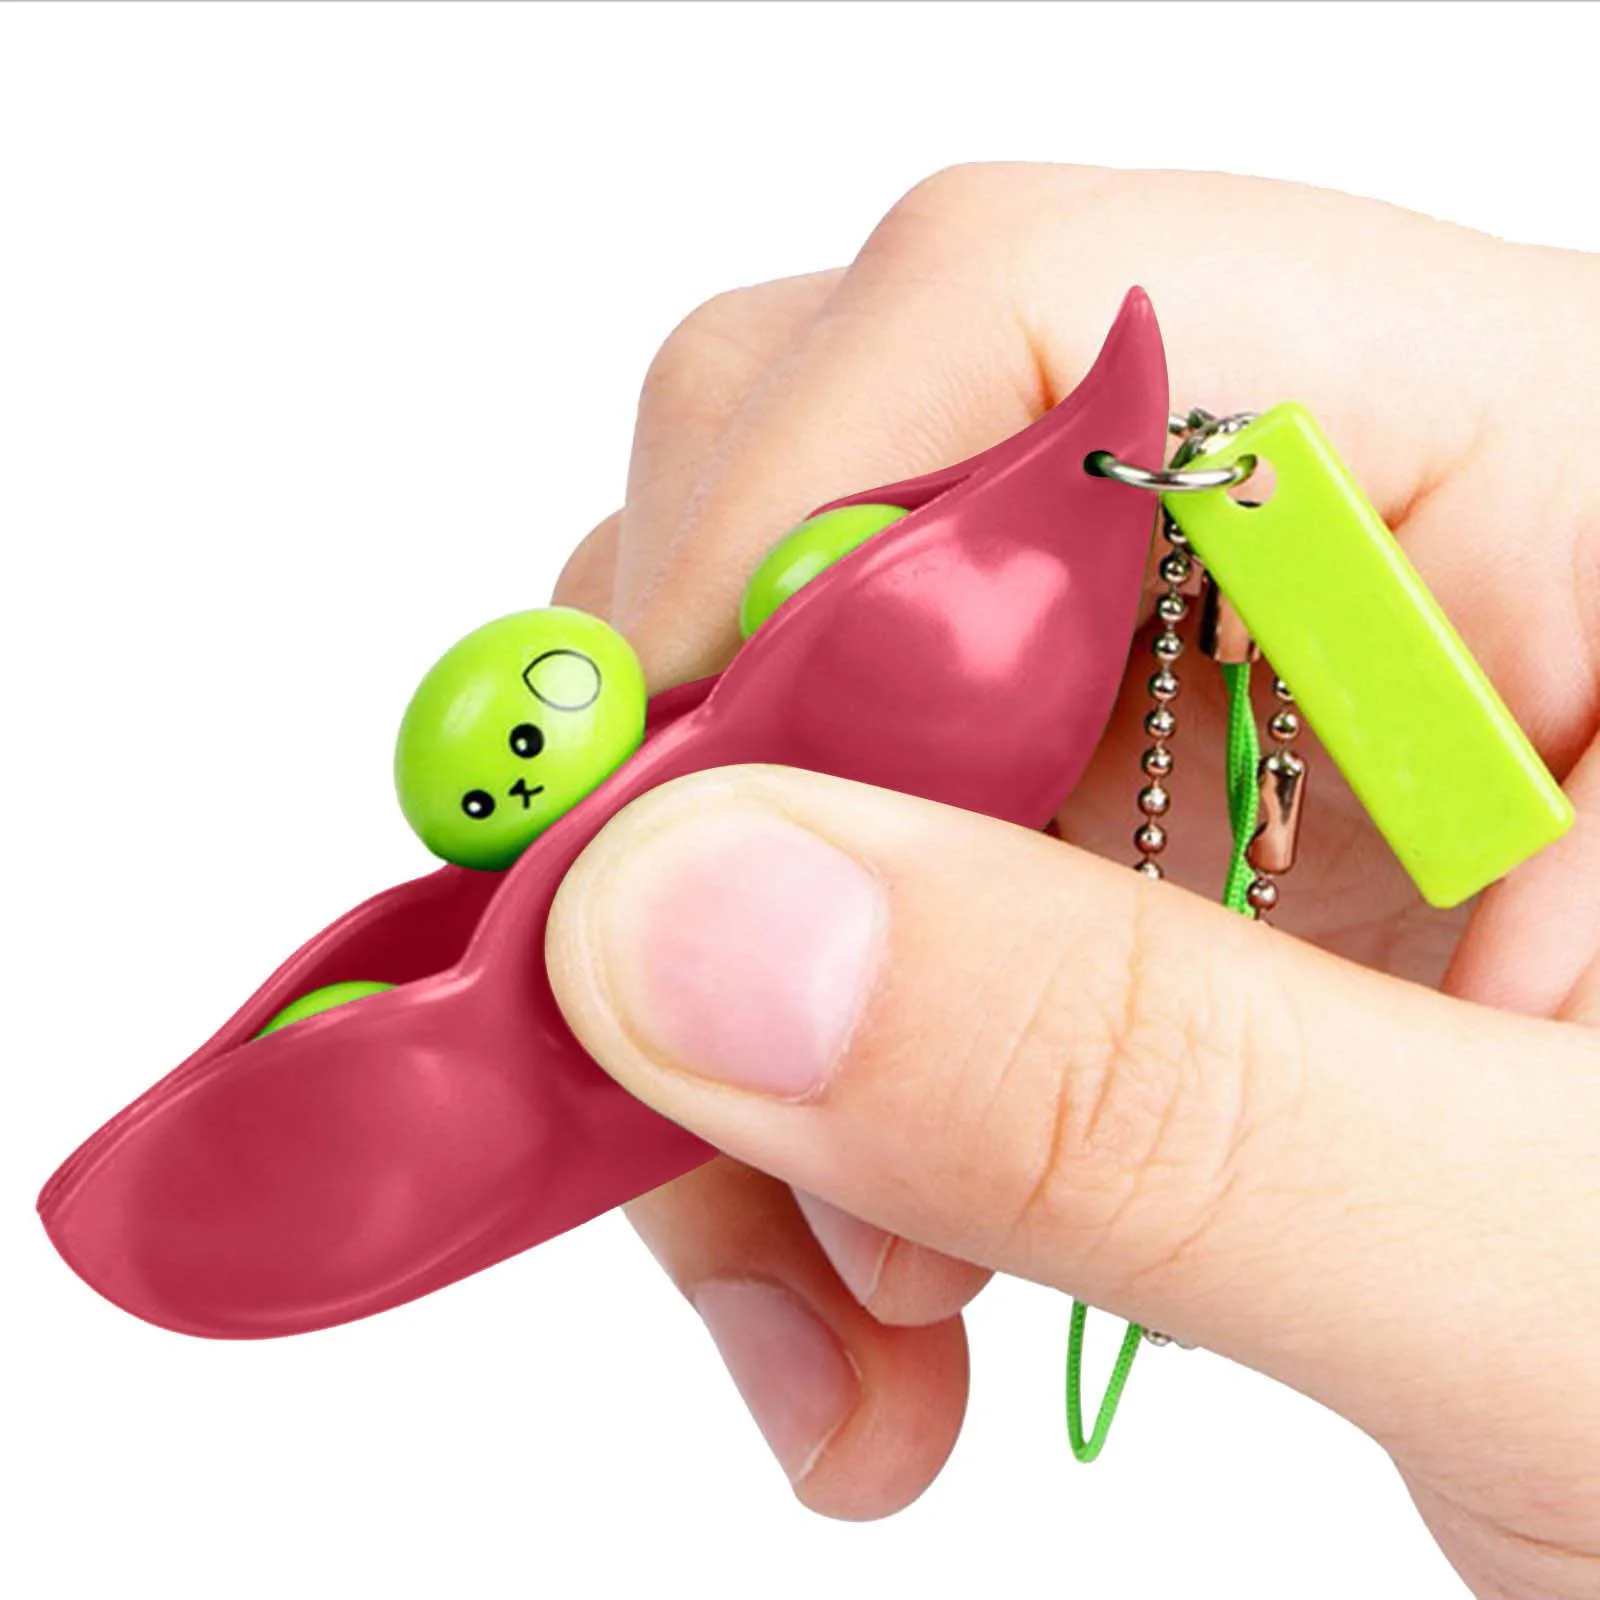 

Fidget Toys Decompression Edamame Toy Push Squishy Squeeze Peas Beans Keychain Cute Stress Relief Cheap Toy Rubber Sensory Gift